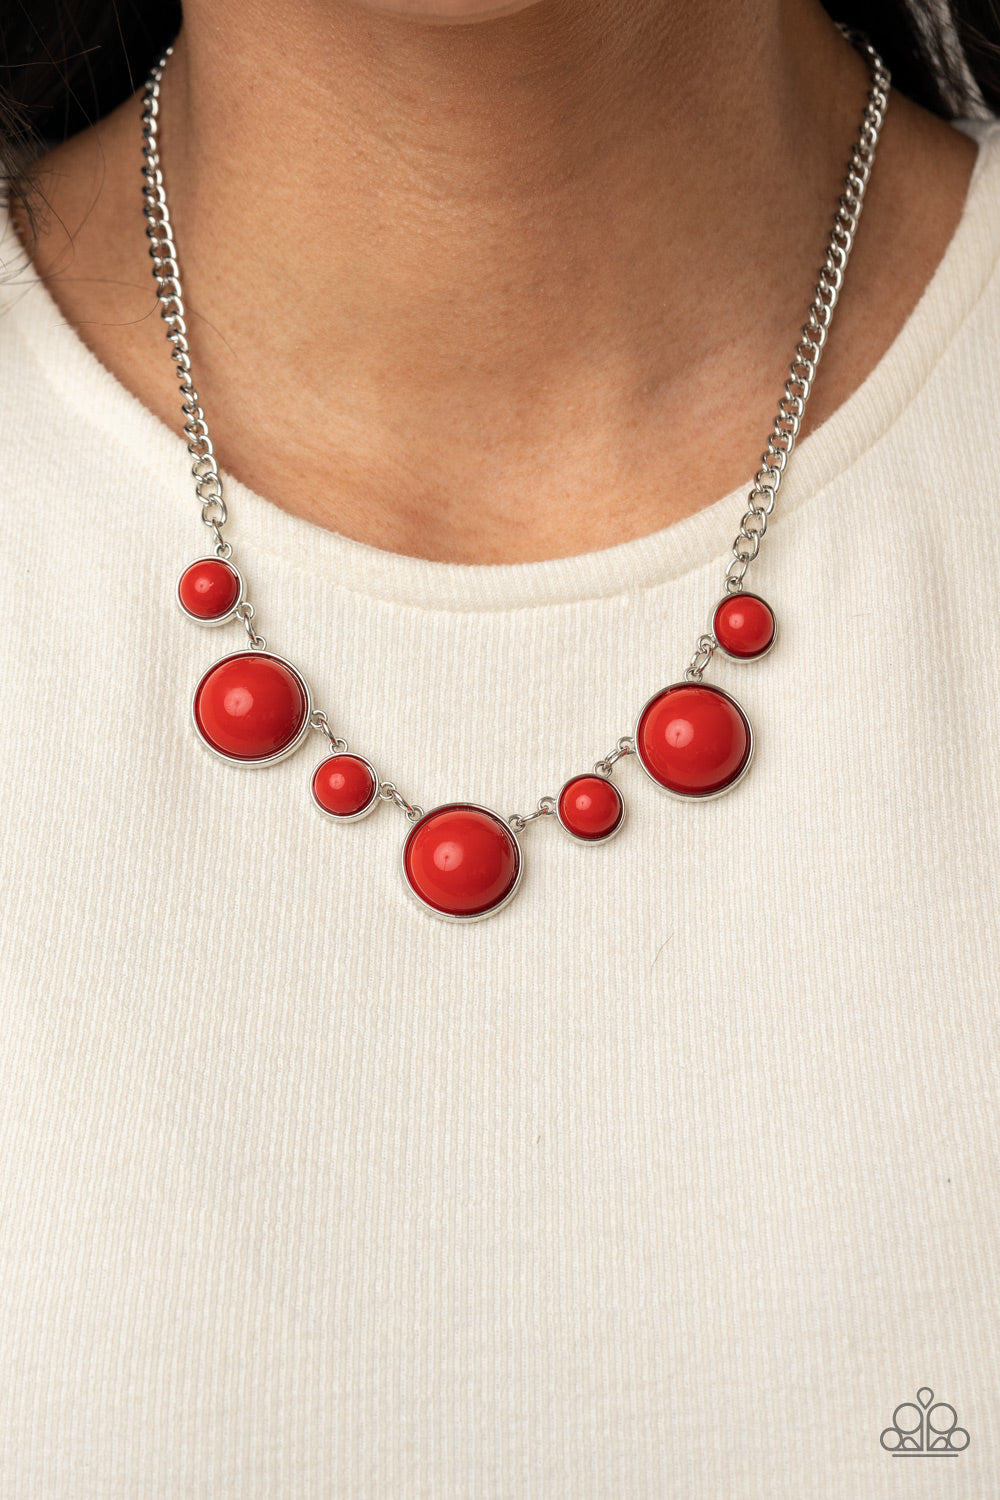 Paparazzi Necklaces - Prismatically POP-tastic - Red